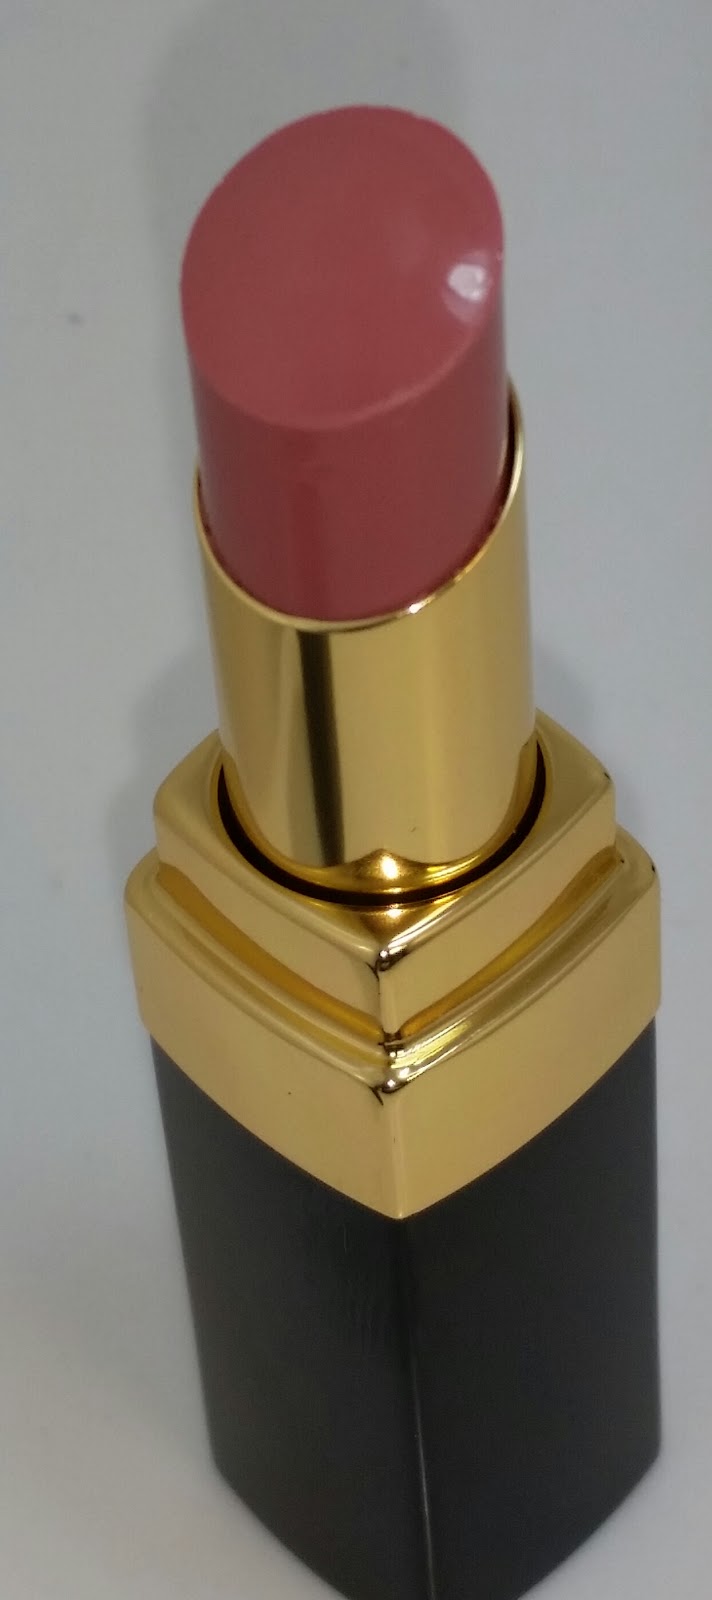 Jayded Dreaming Beauty Blog : 93 INTIME CHANEL ROUGE COCO SHINE